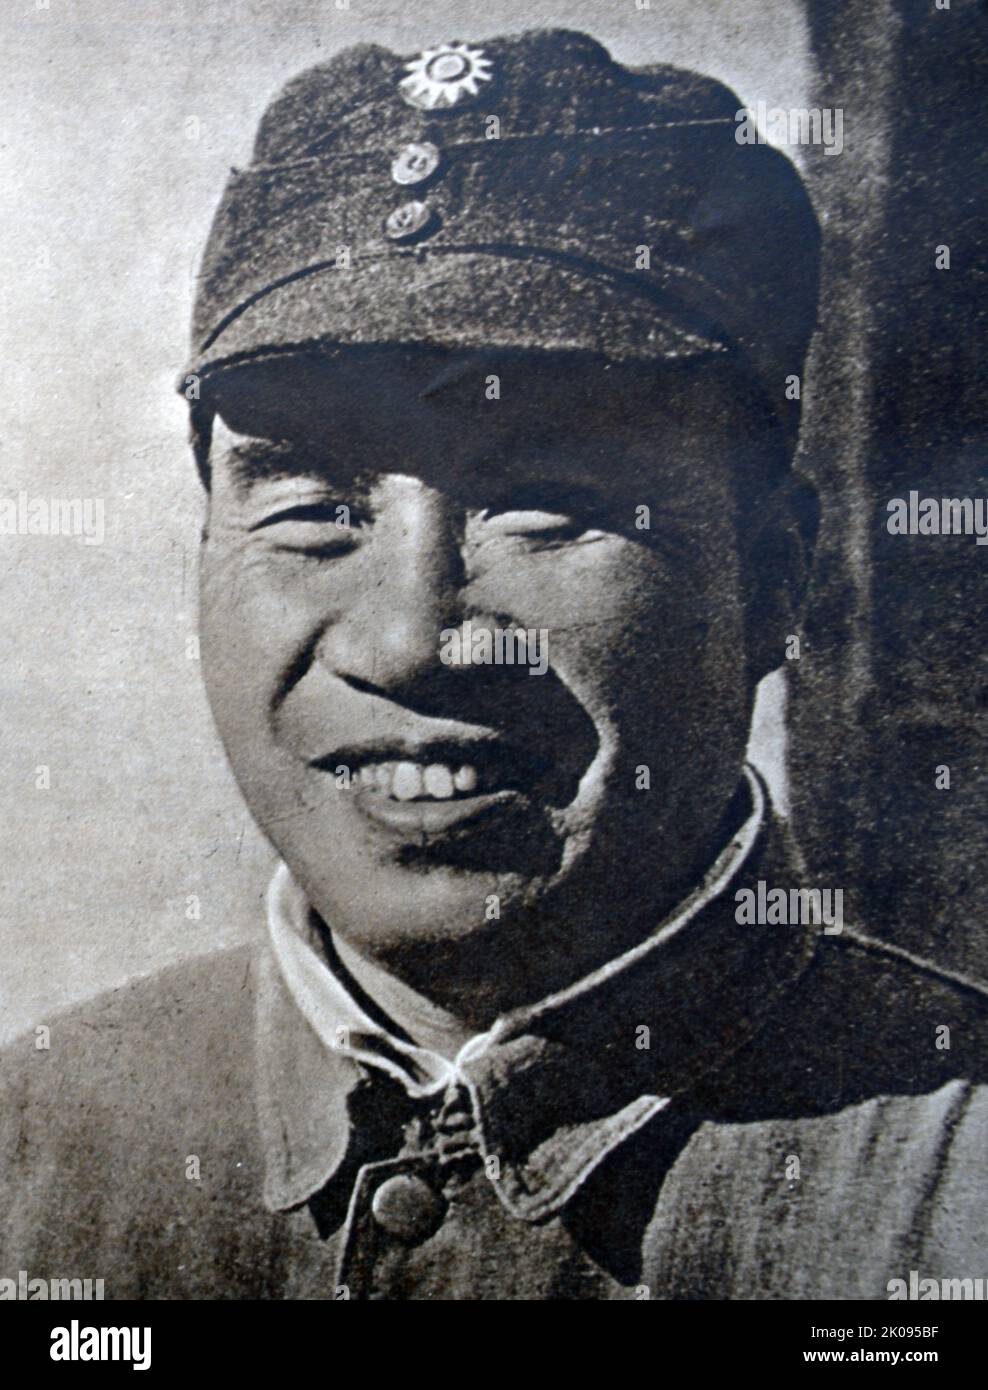 General Chu Teh. Zhu De (1 December 1886 - 6 July 1976) was a Chinese general, military strategist, politician, revolutionary of the Chinese Communist Party. Stock Photo